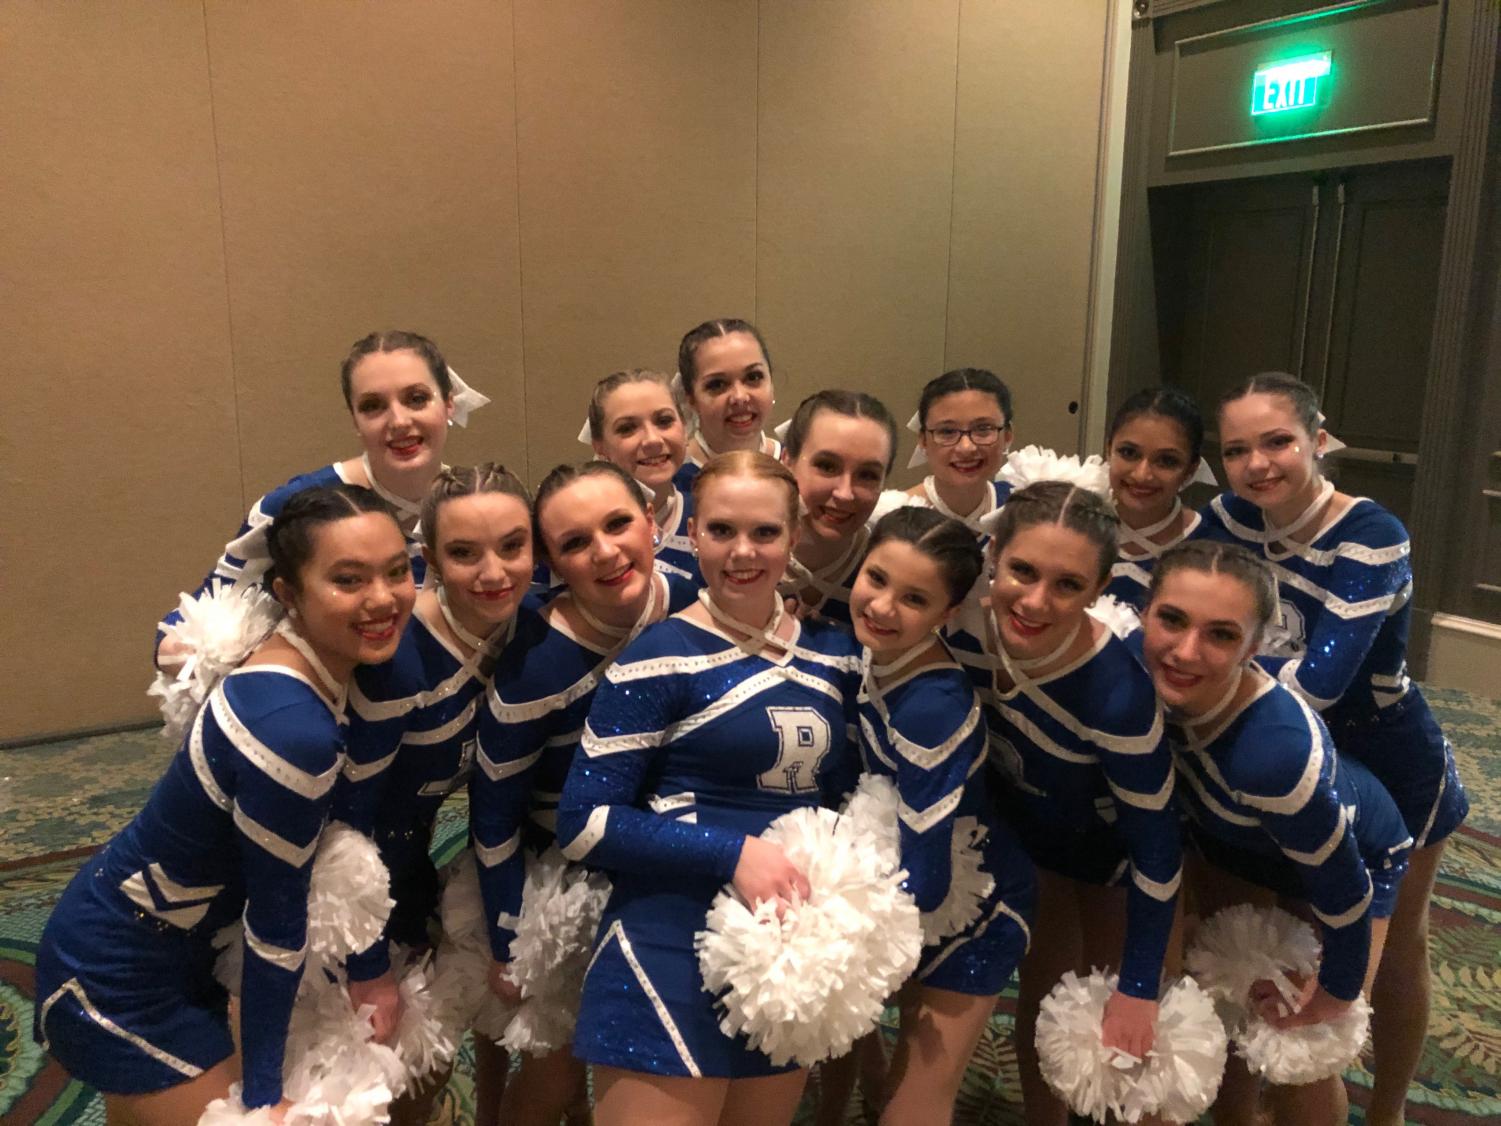 Rochester Dance Team takes home 5th, 7th place at Nationals The Talon